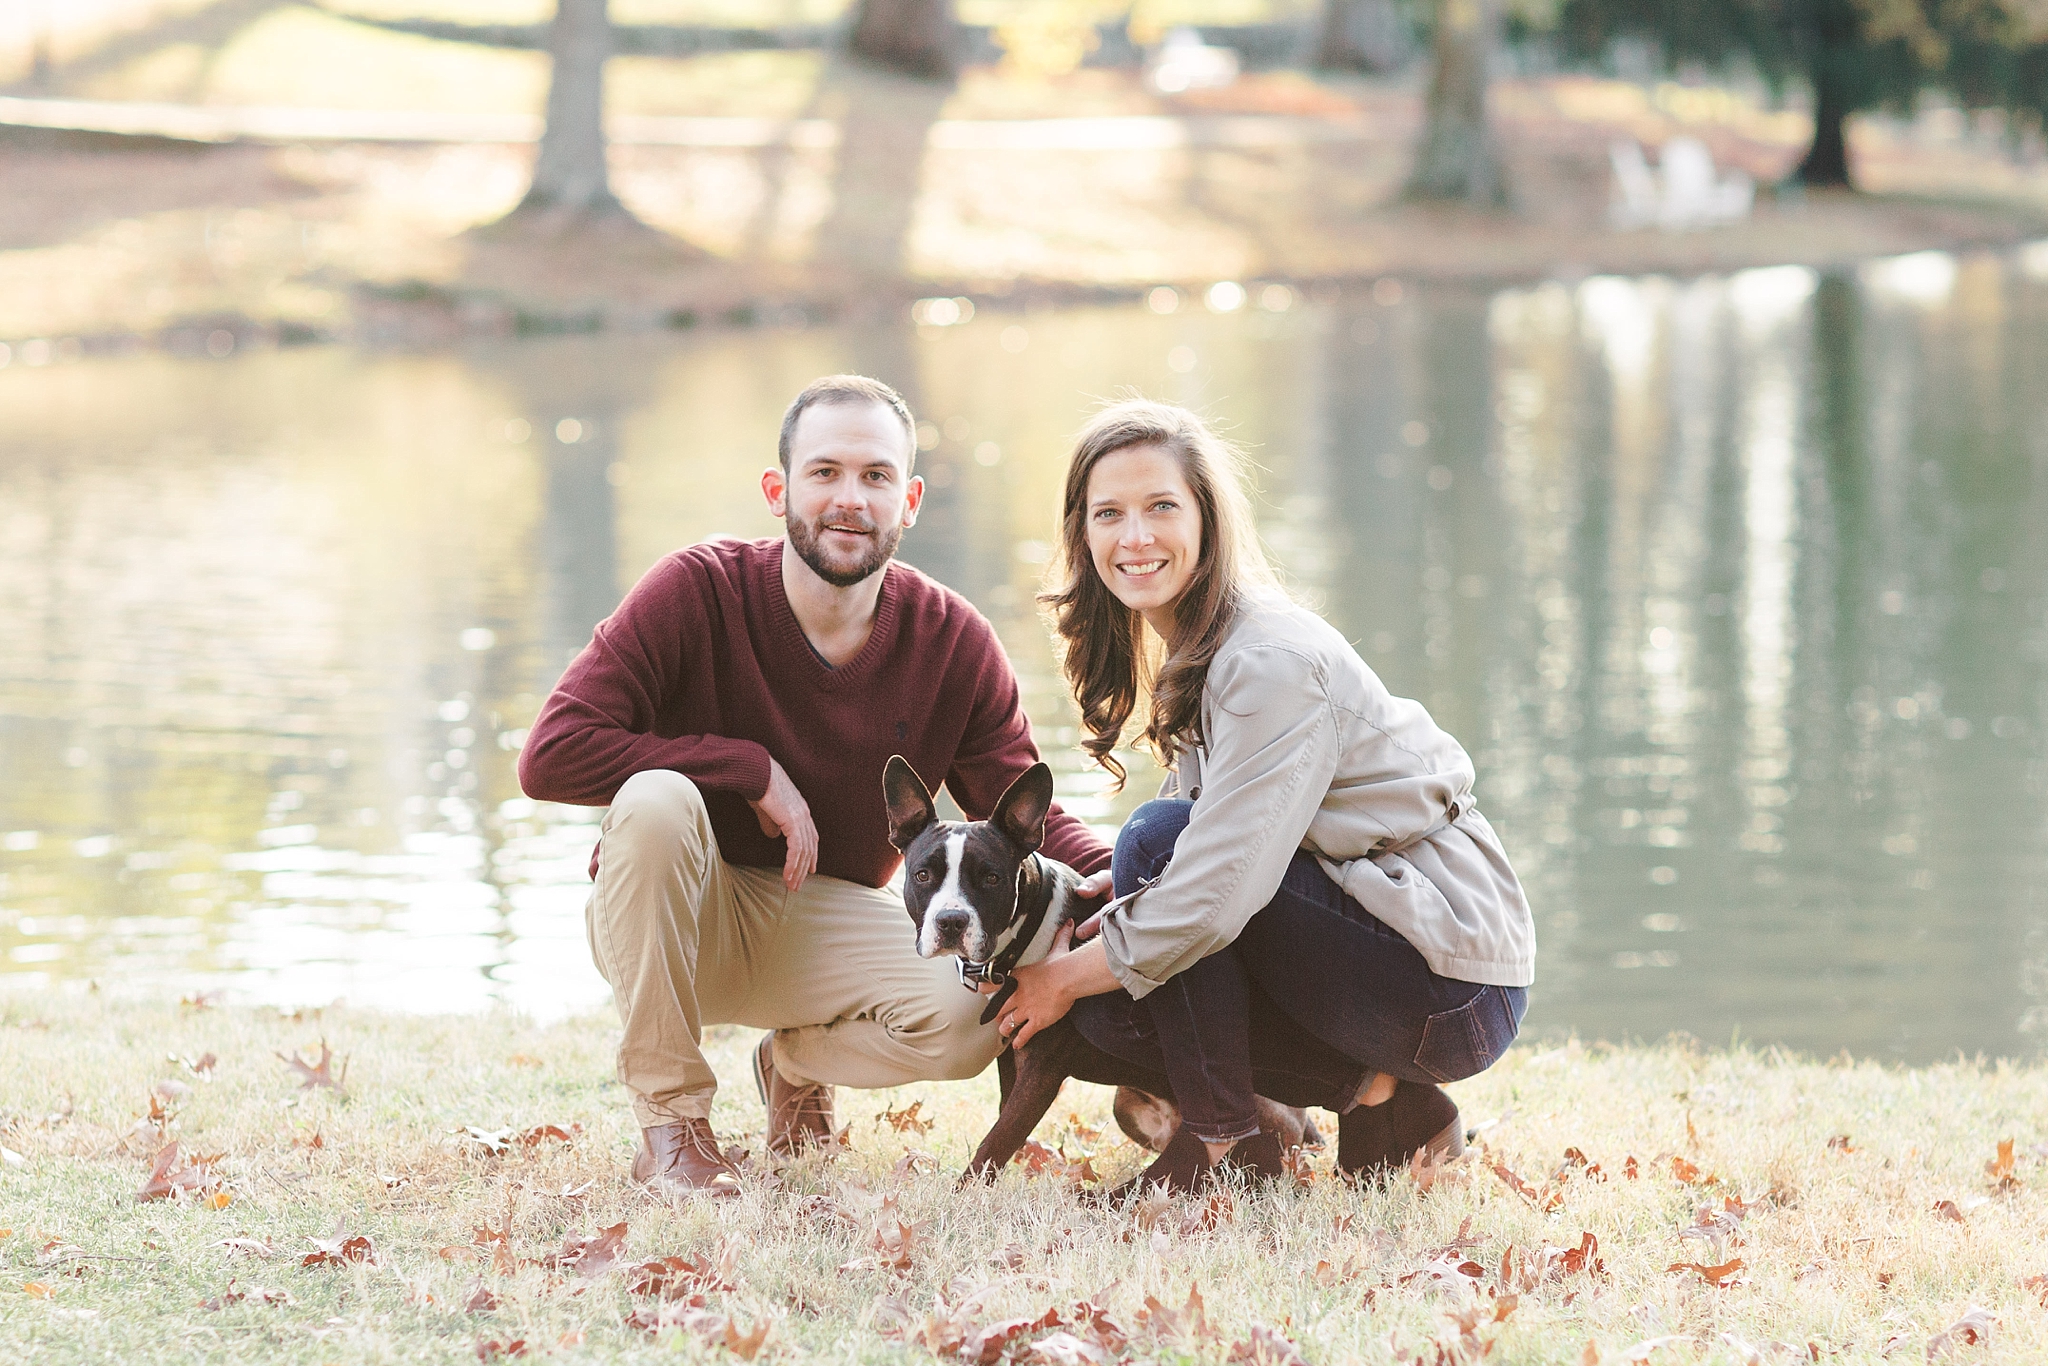 A romantic garden engagement session photographed in Warrenton, VA by DC wedding photographer, Alicia Lacey.